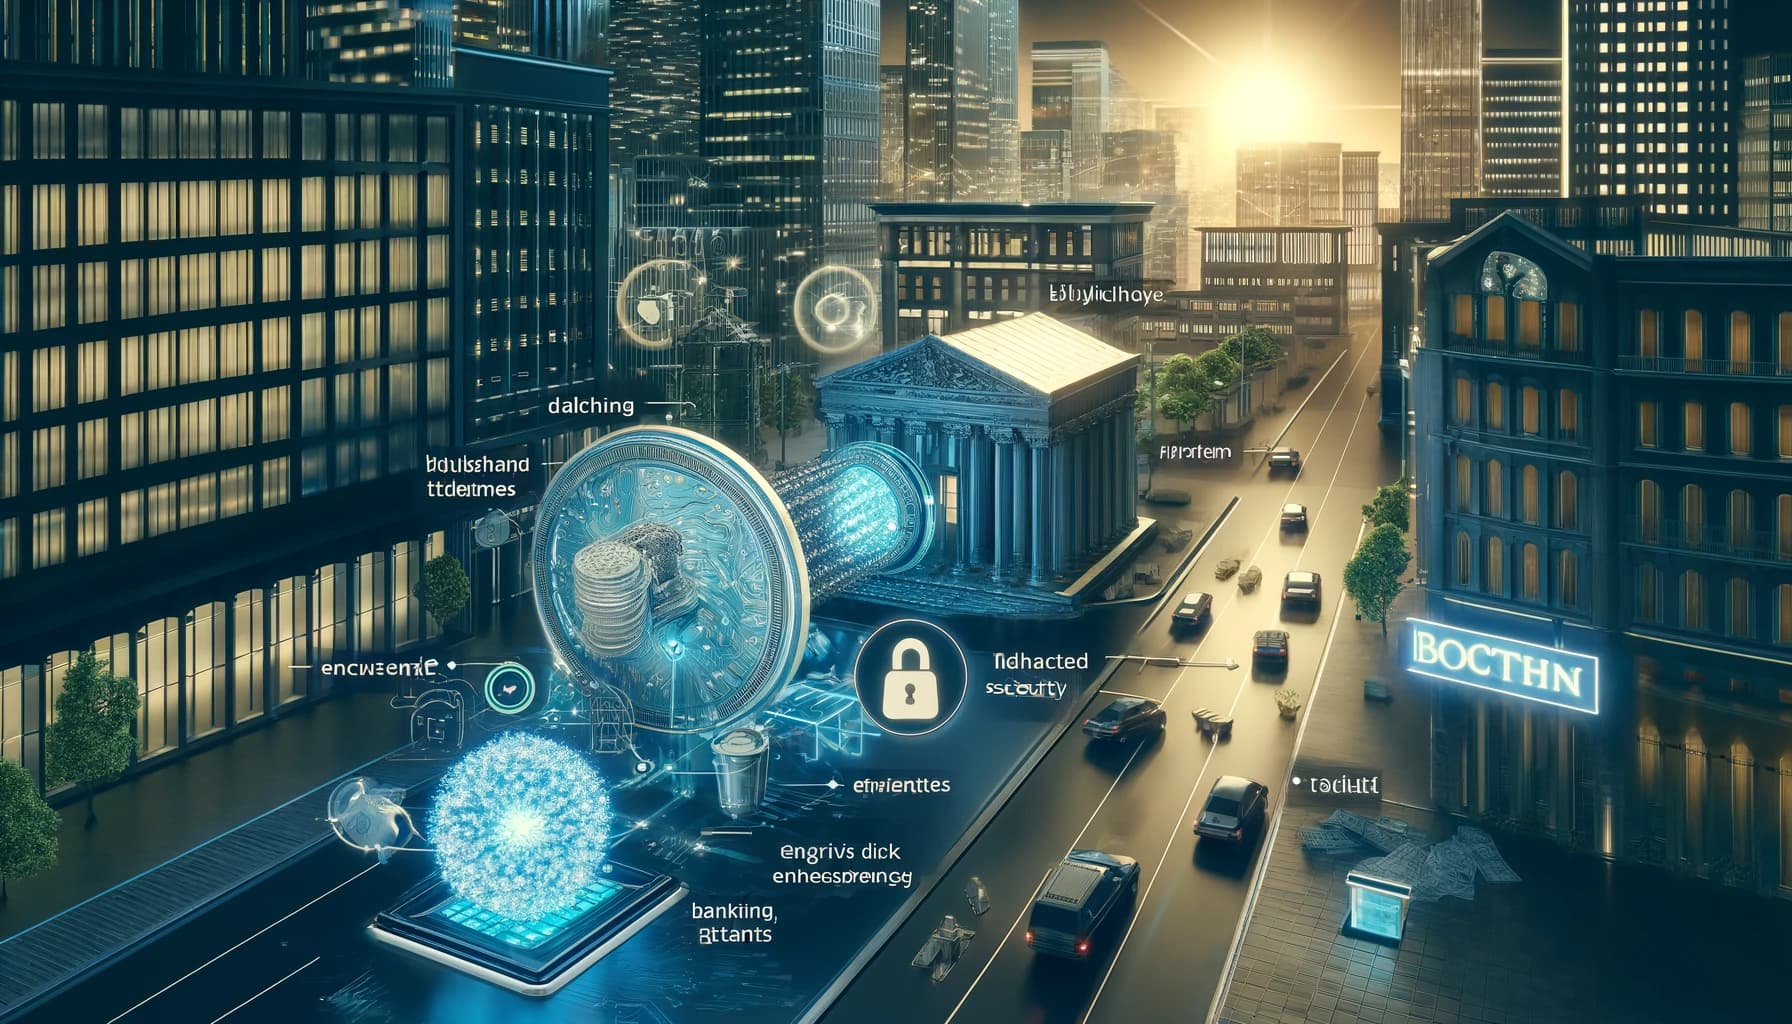 Bucket Technologies image showing an animated fictional town that shows blockchain elements located in front of a bank like structure with a row of traffic (cars) passing by.